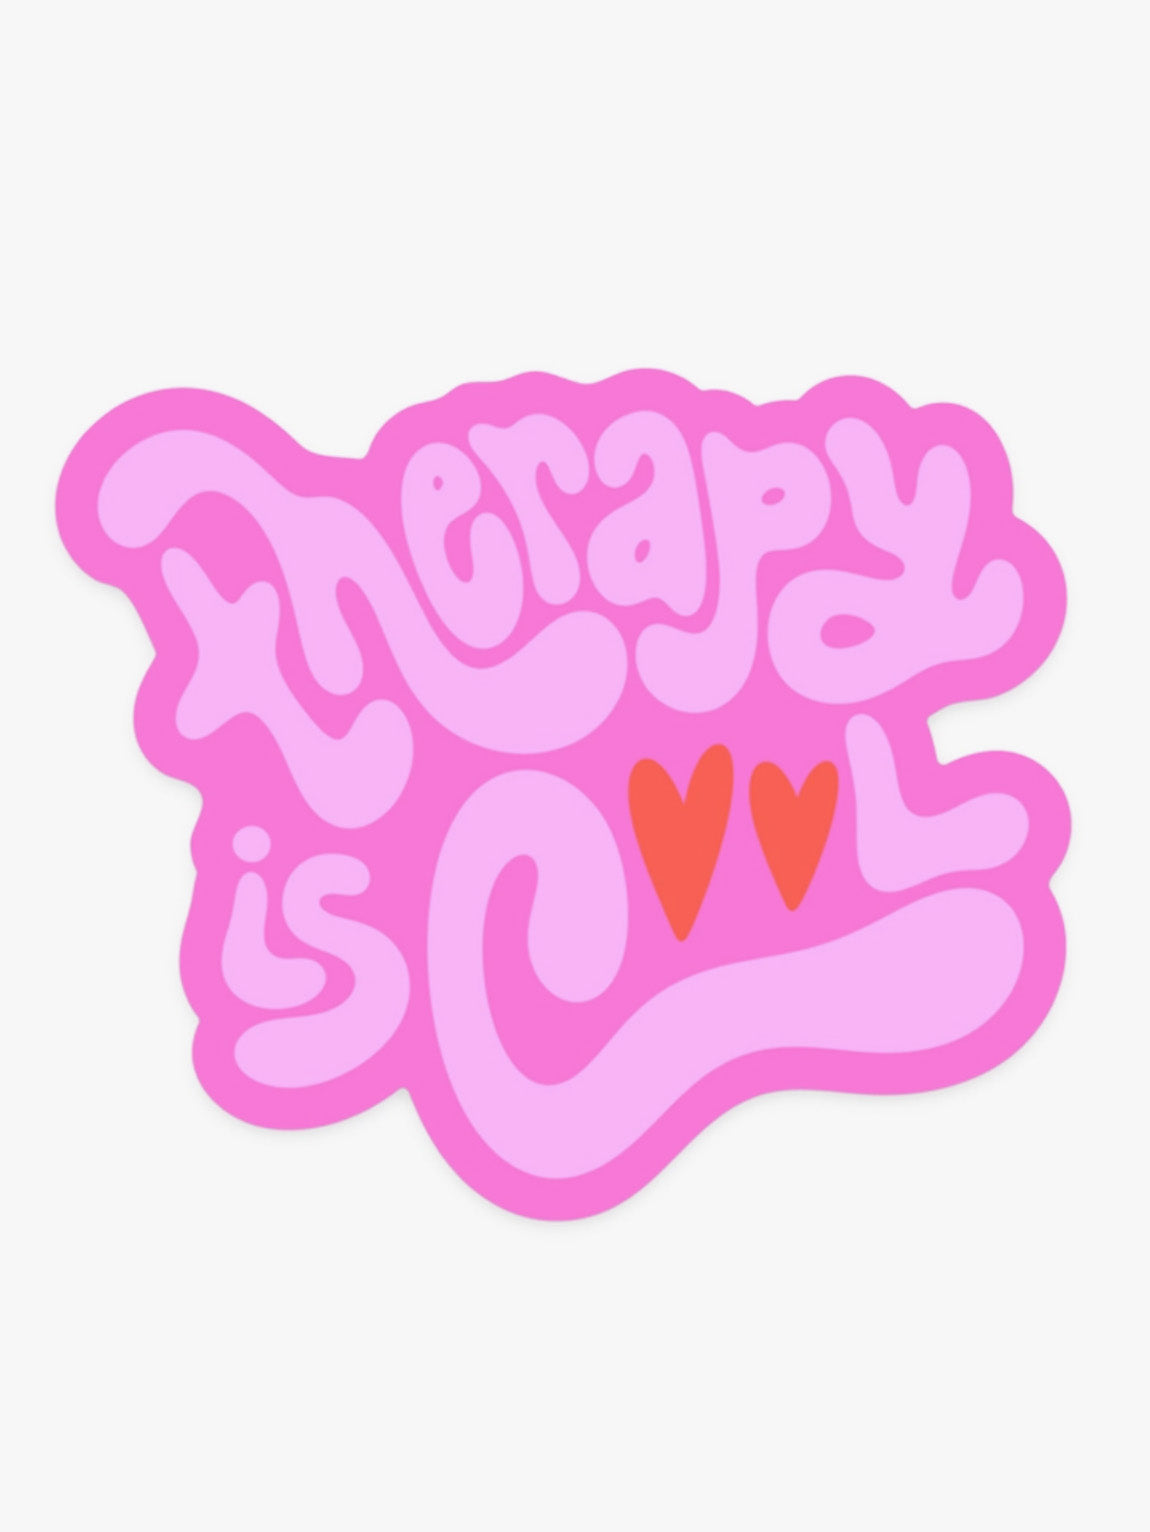 therapy is cool sticker